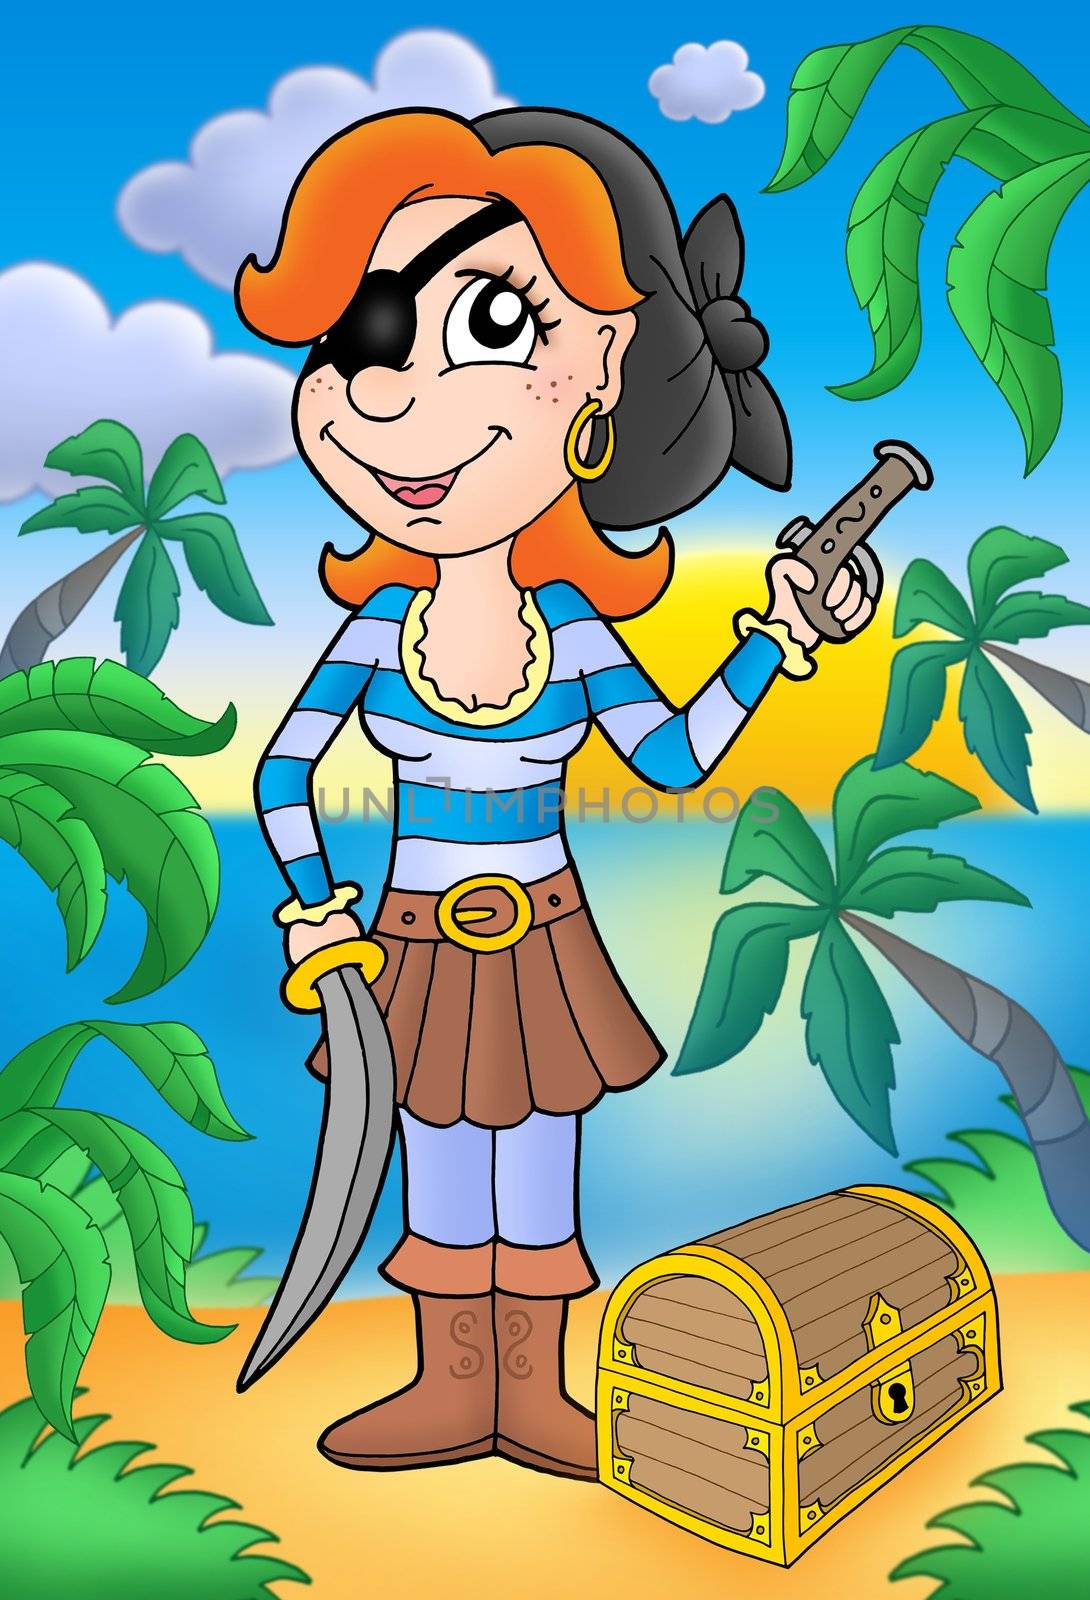 Pirate woman with pistol and treasure chest by clairev